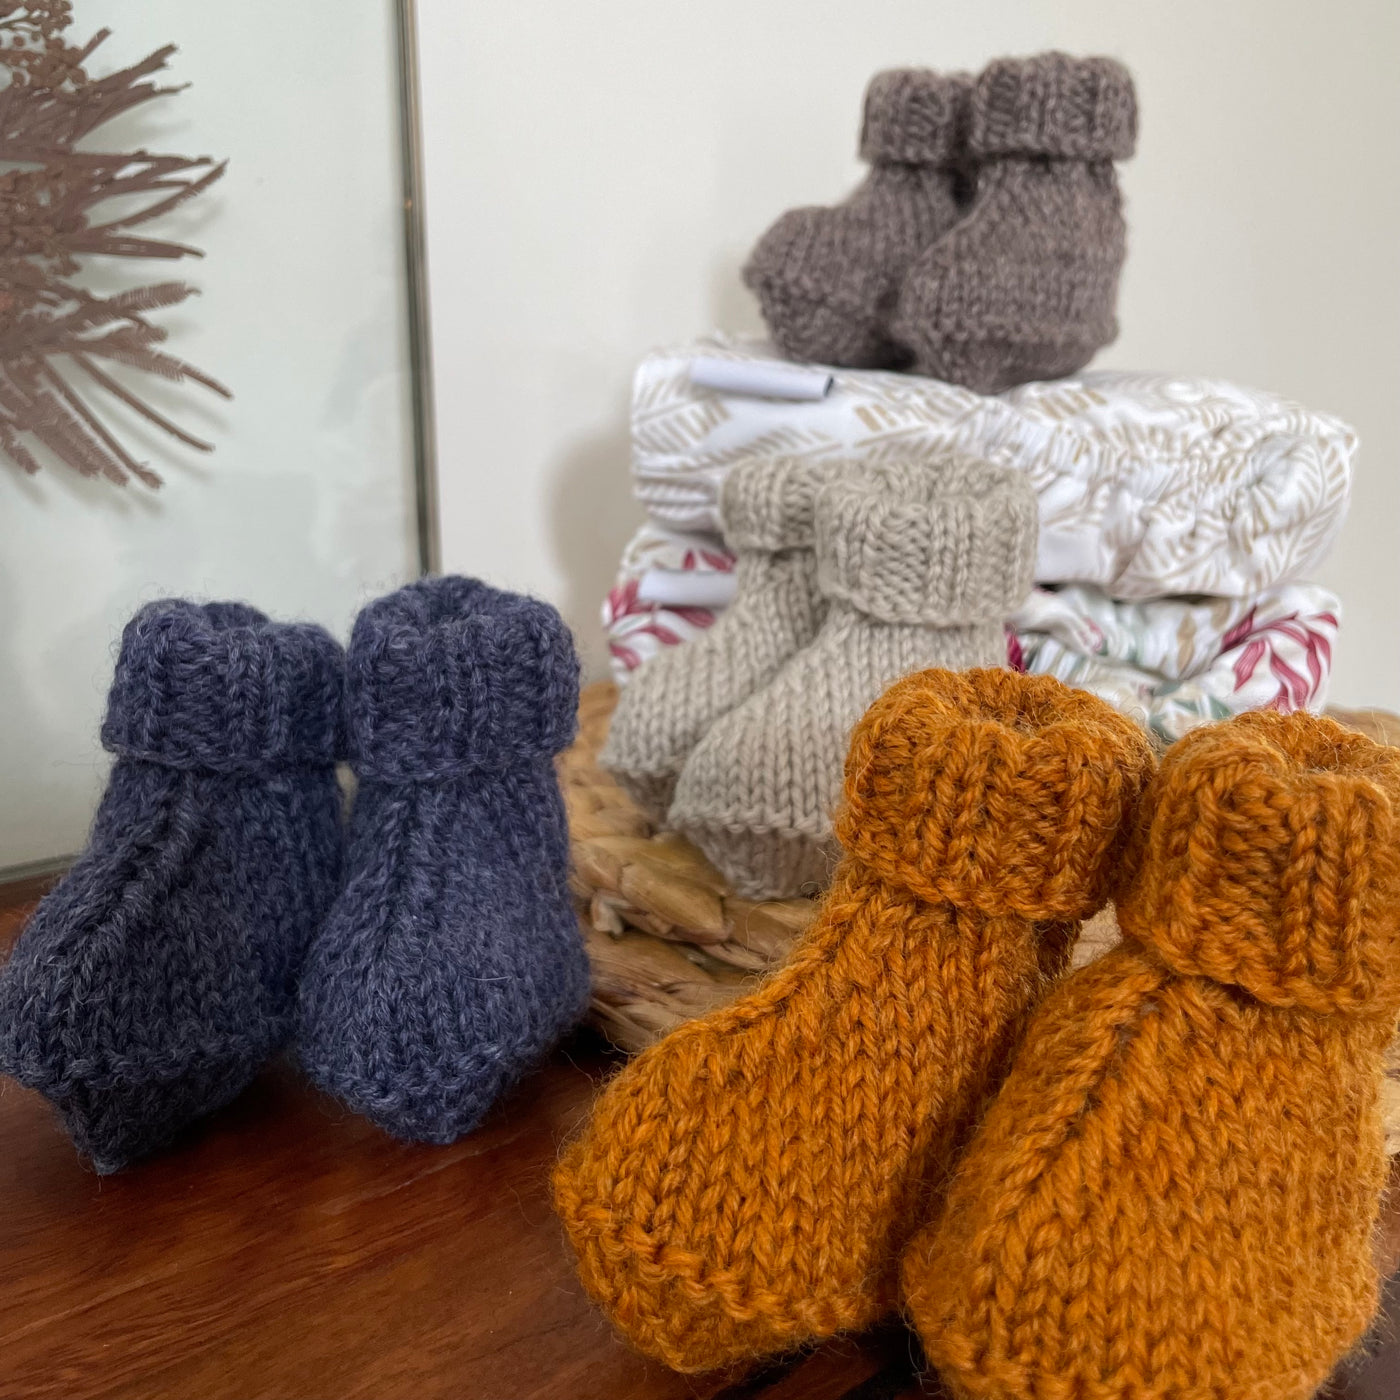 4 different styled baby booties on display with cloth nappies